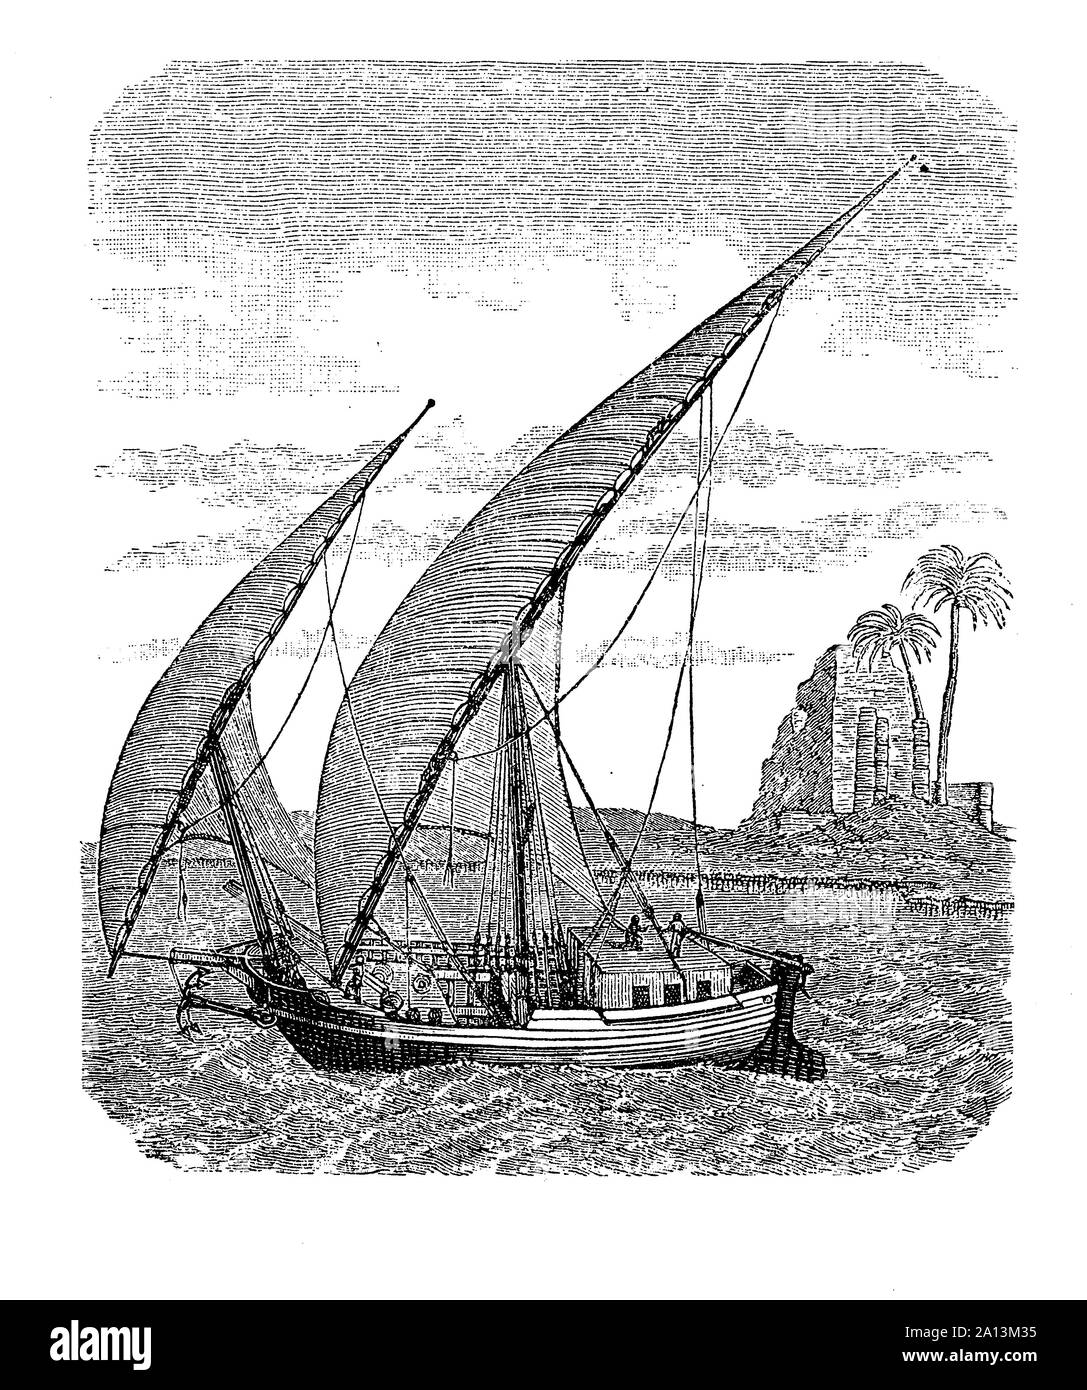 Lateen-rigged felucca, traditional Egyptian boat lght, small and maneuverable cruising the Nile river, 17th century Stock Photo